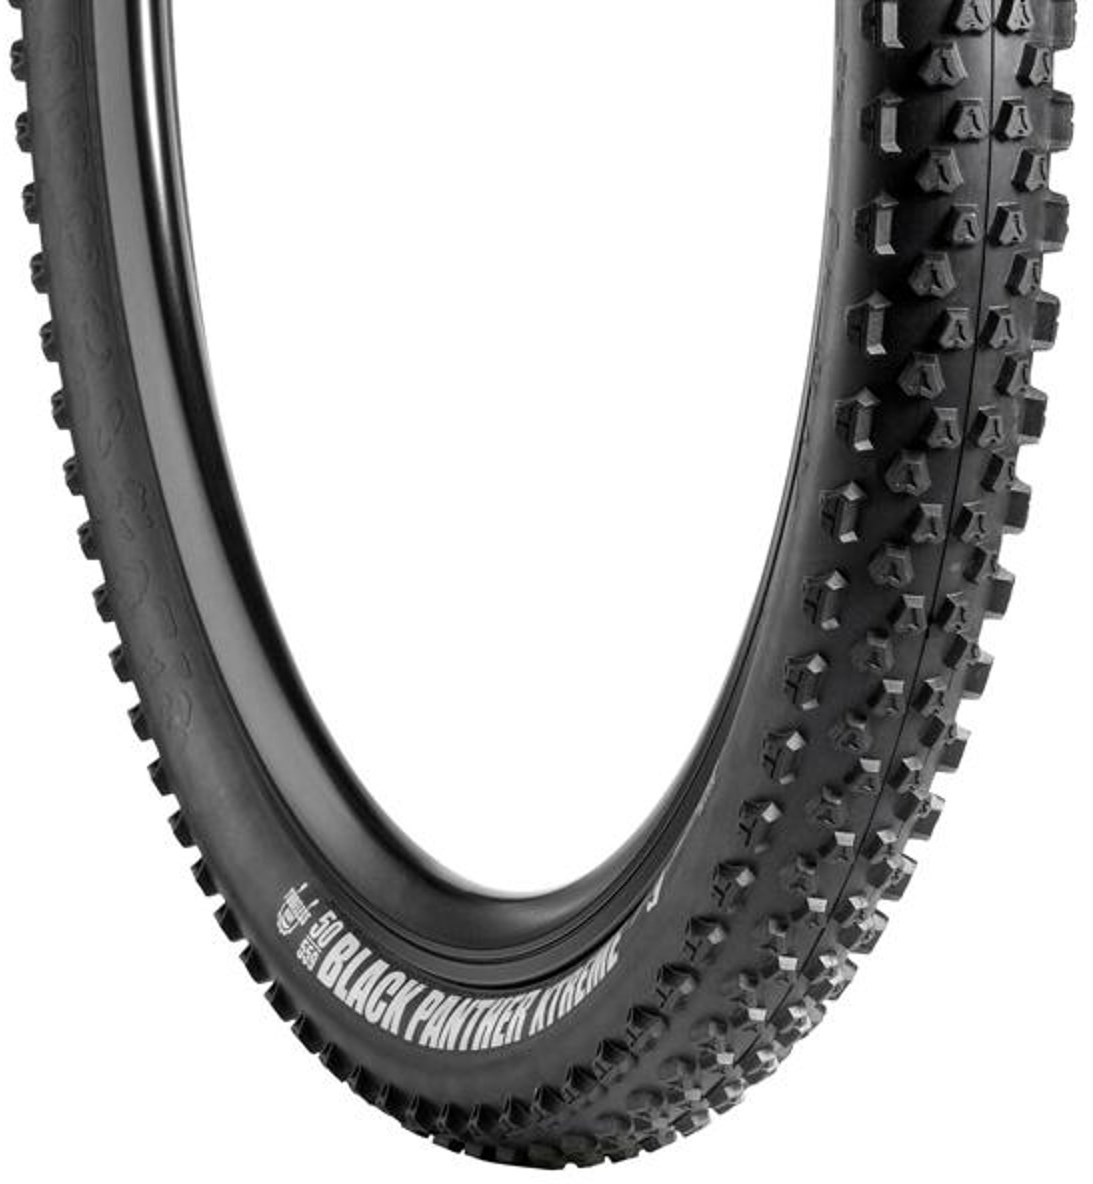 Vredestein Black Panther Xtreme 29er Off Road MTB Tyre - Tubeless Ready product image